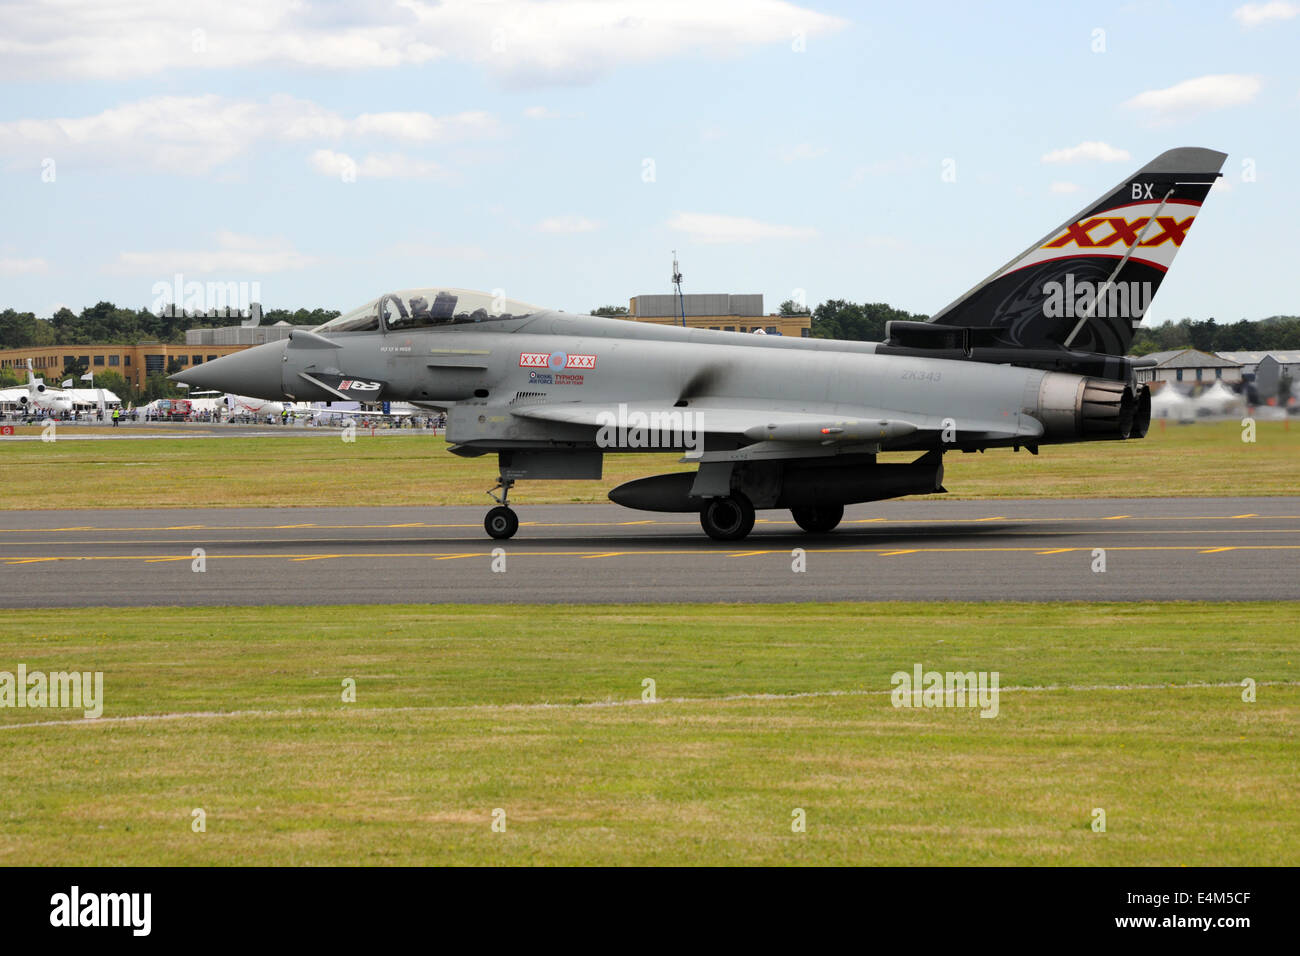 Farnborough, UK. 14th July, 2014. A Royal Air Force Typhoon fighter jet taxiing before an air display at the Farnborough International Air Show Farnborough, UK. 14th July, 2014. Credit:  Martin Brayley/Alamy Live News Stock Photo